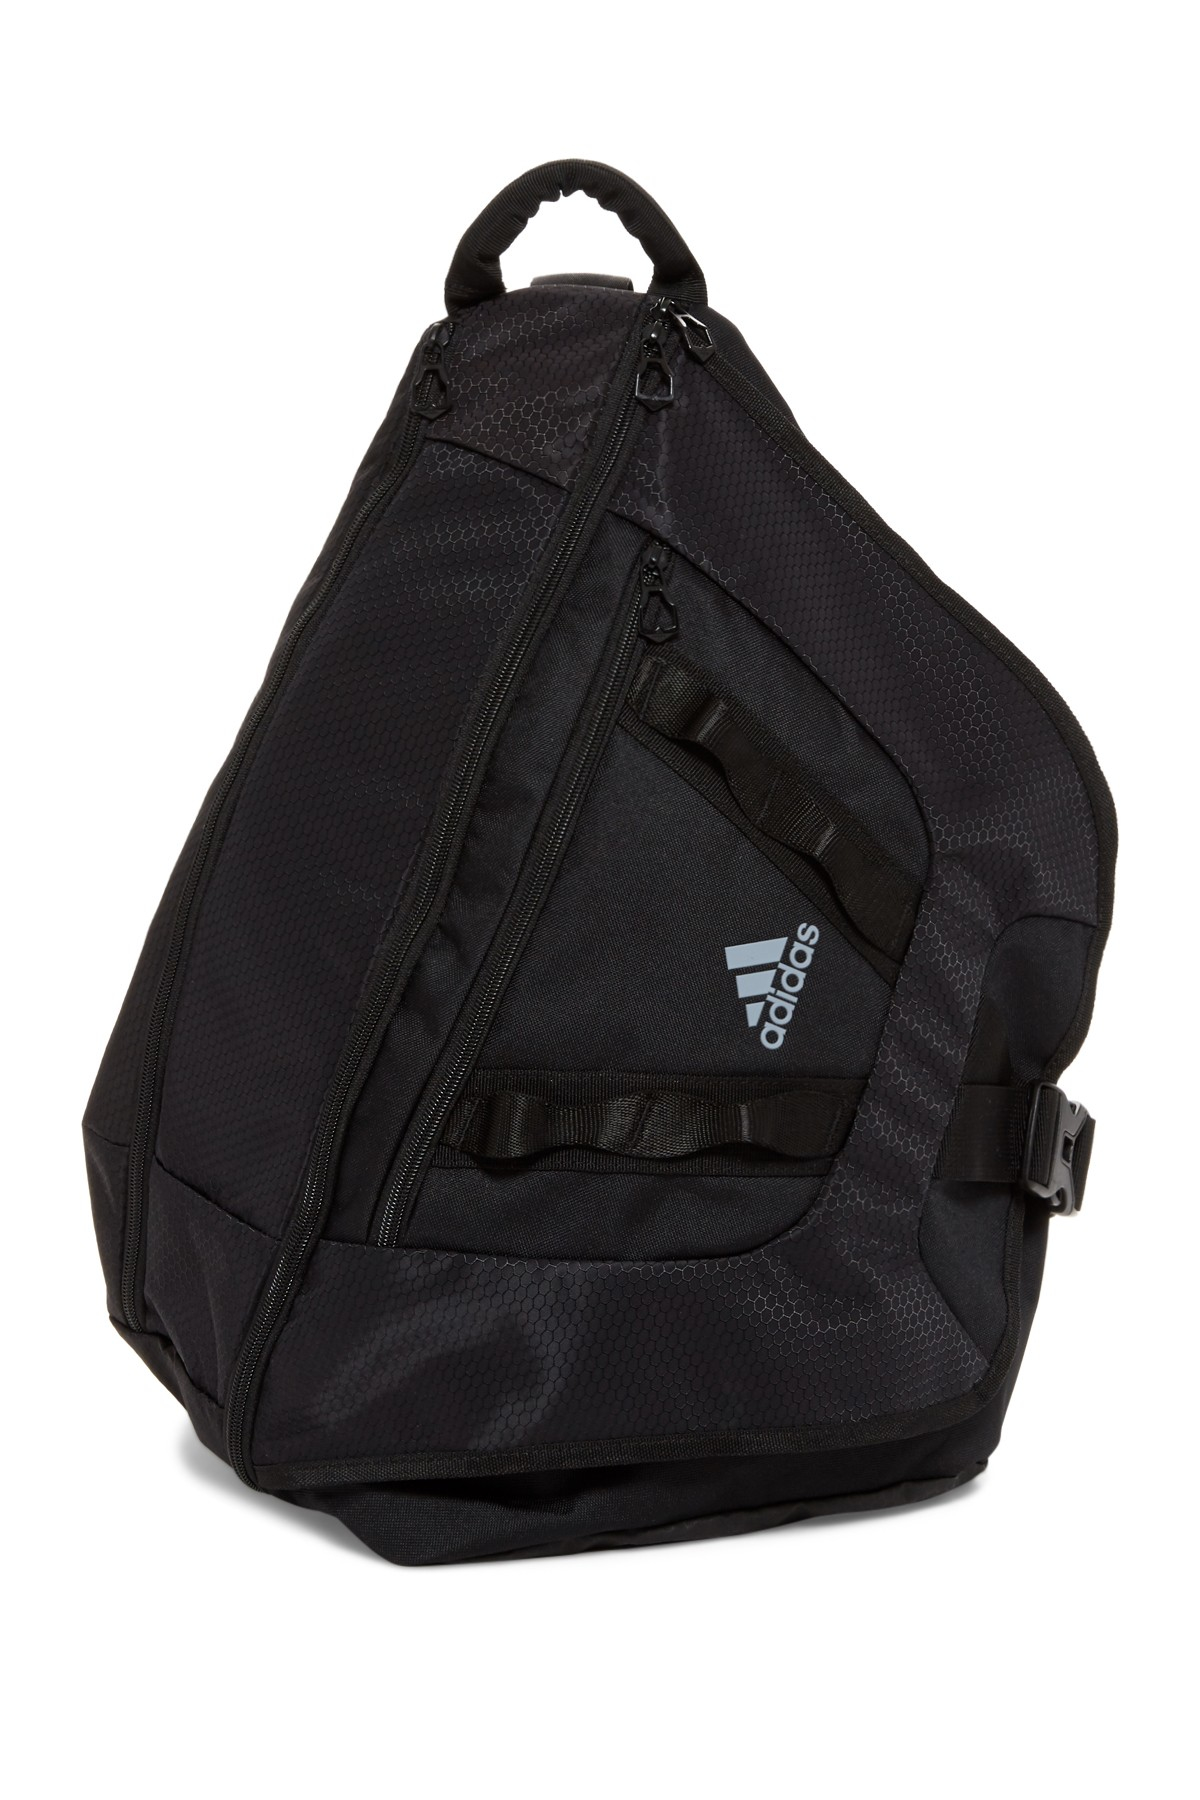 adidas Originals Synthetic Capital Ii Backpack in Black for Men - Lyst